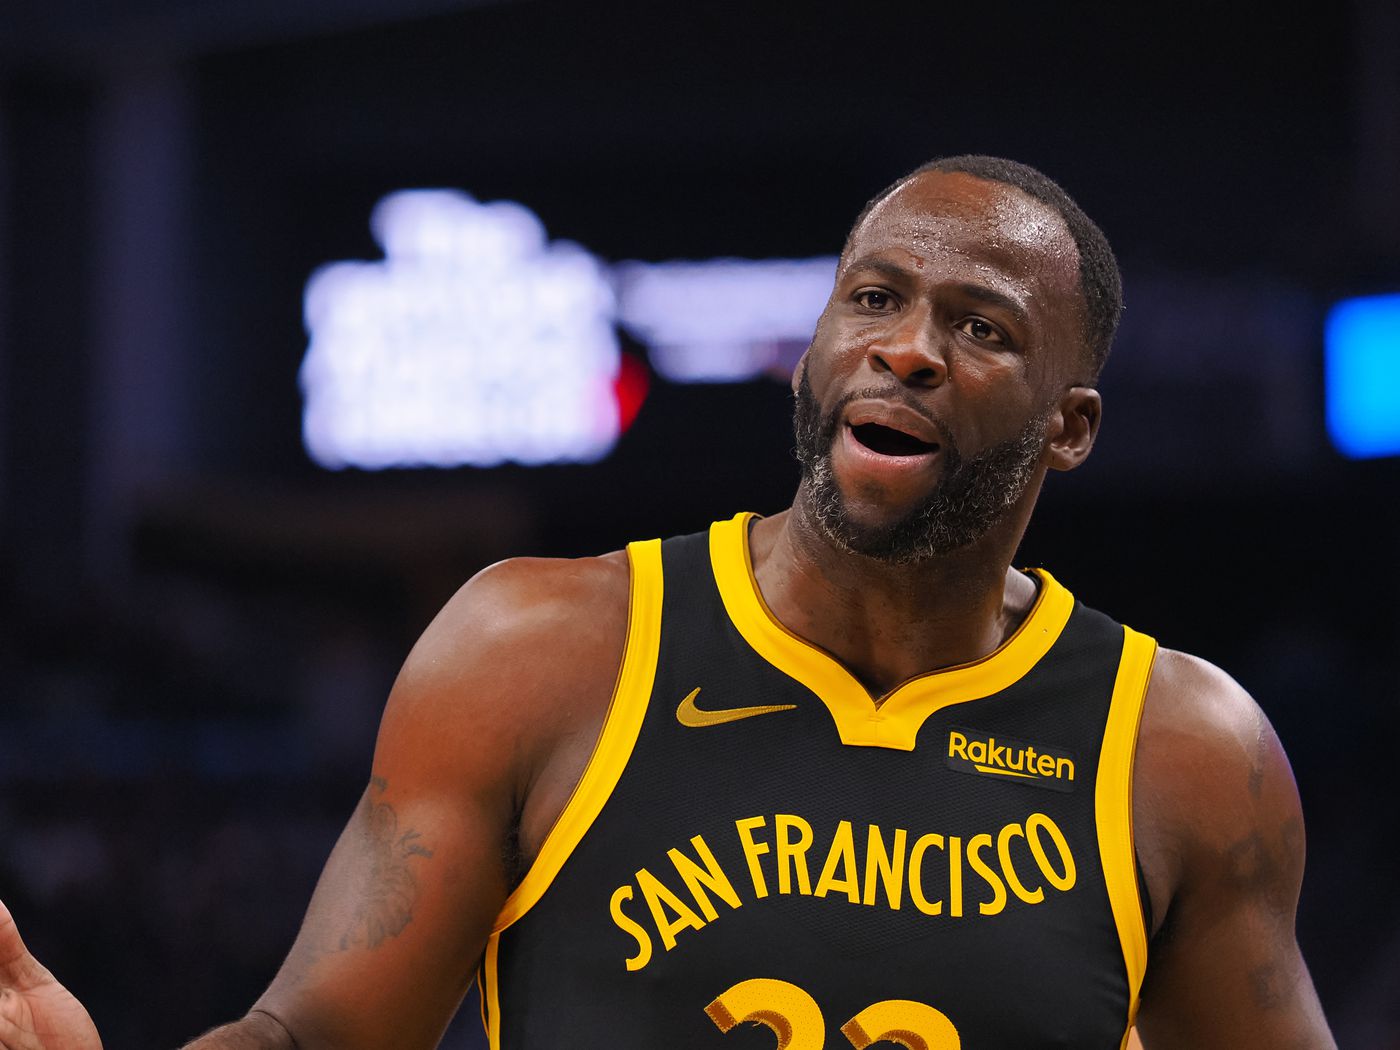 Warriors' Drama on Court: Draymond Green's Ejection Sparks Debate